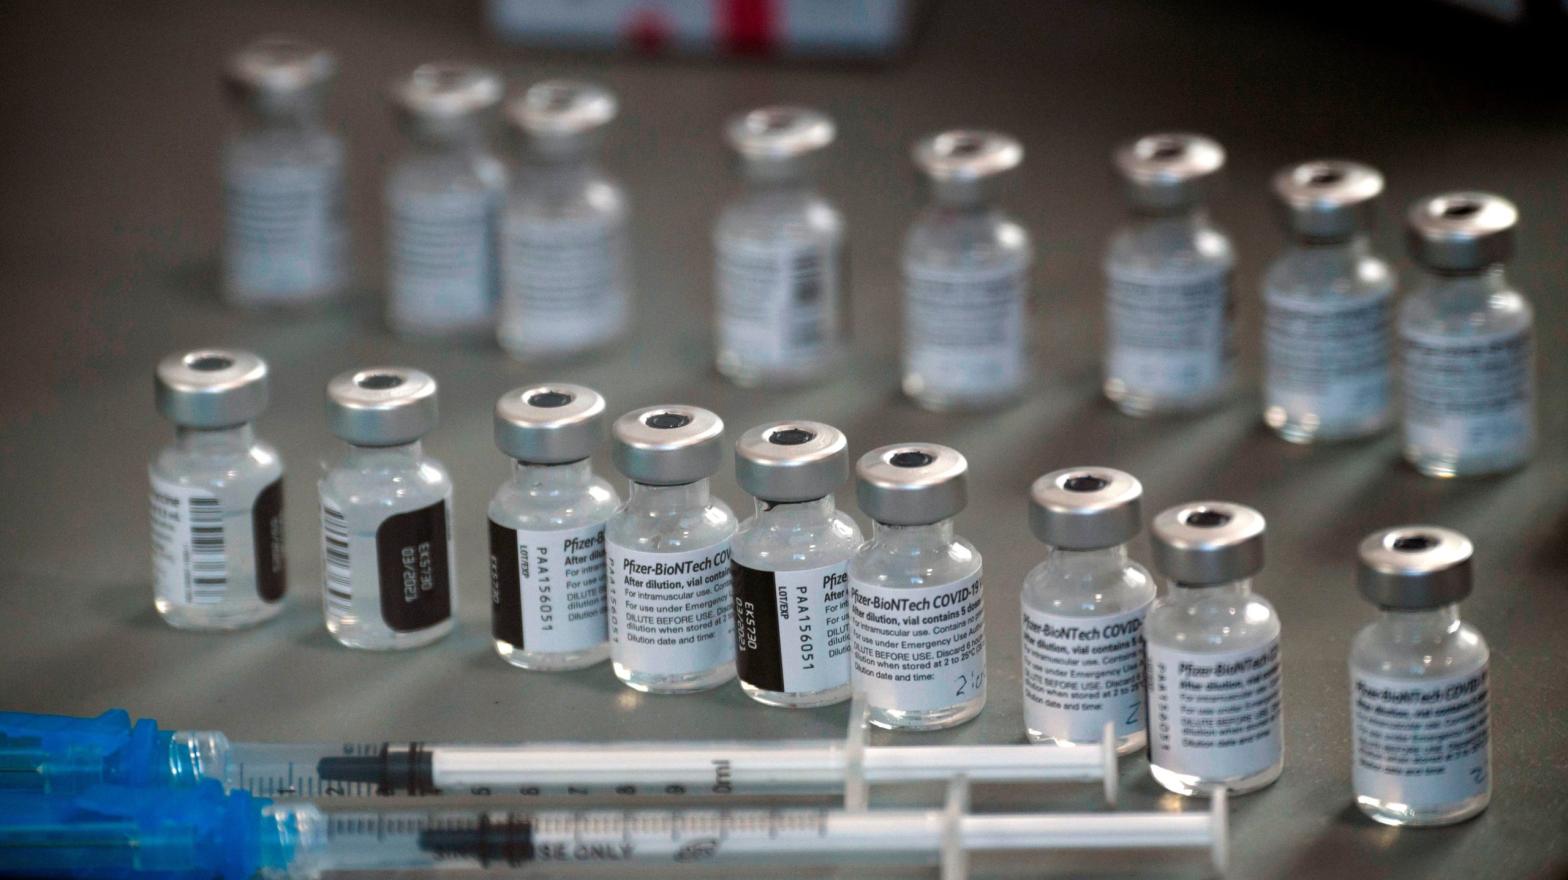 Above, vials of the Pfizer/BioNTech covid-19 vaccine (Photo: Patrick T. Fallon, Getty Images)